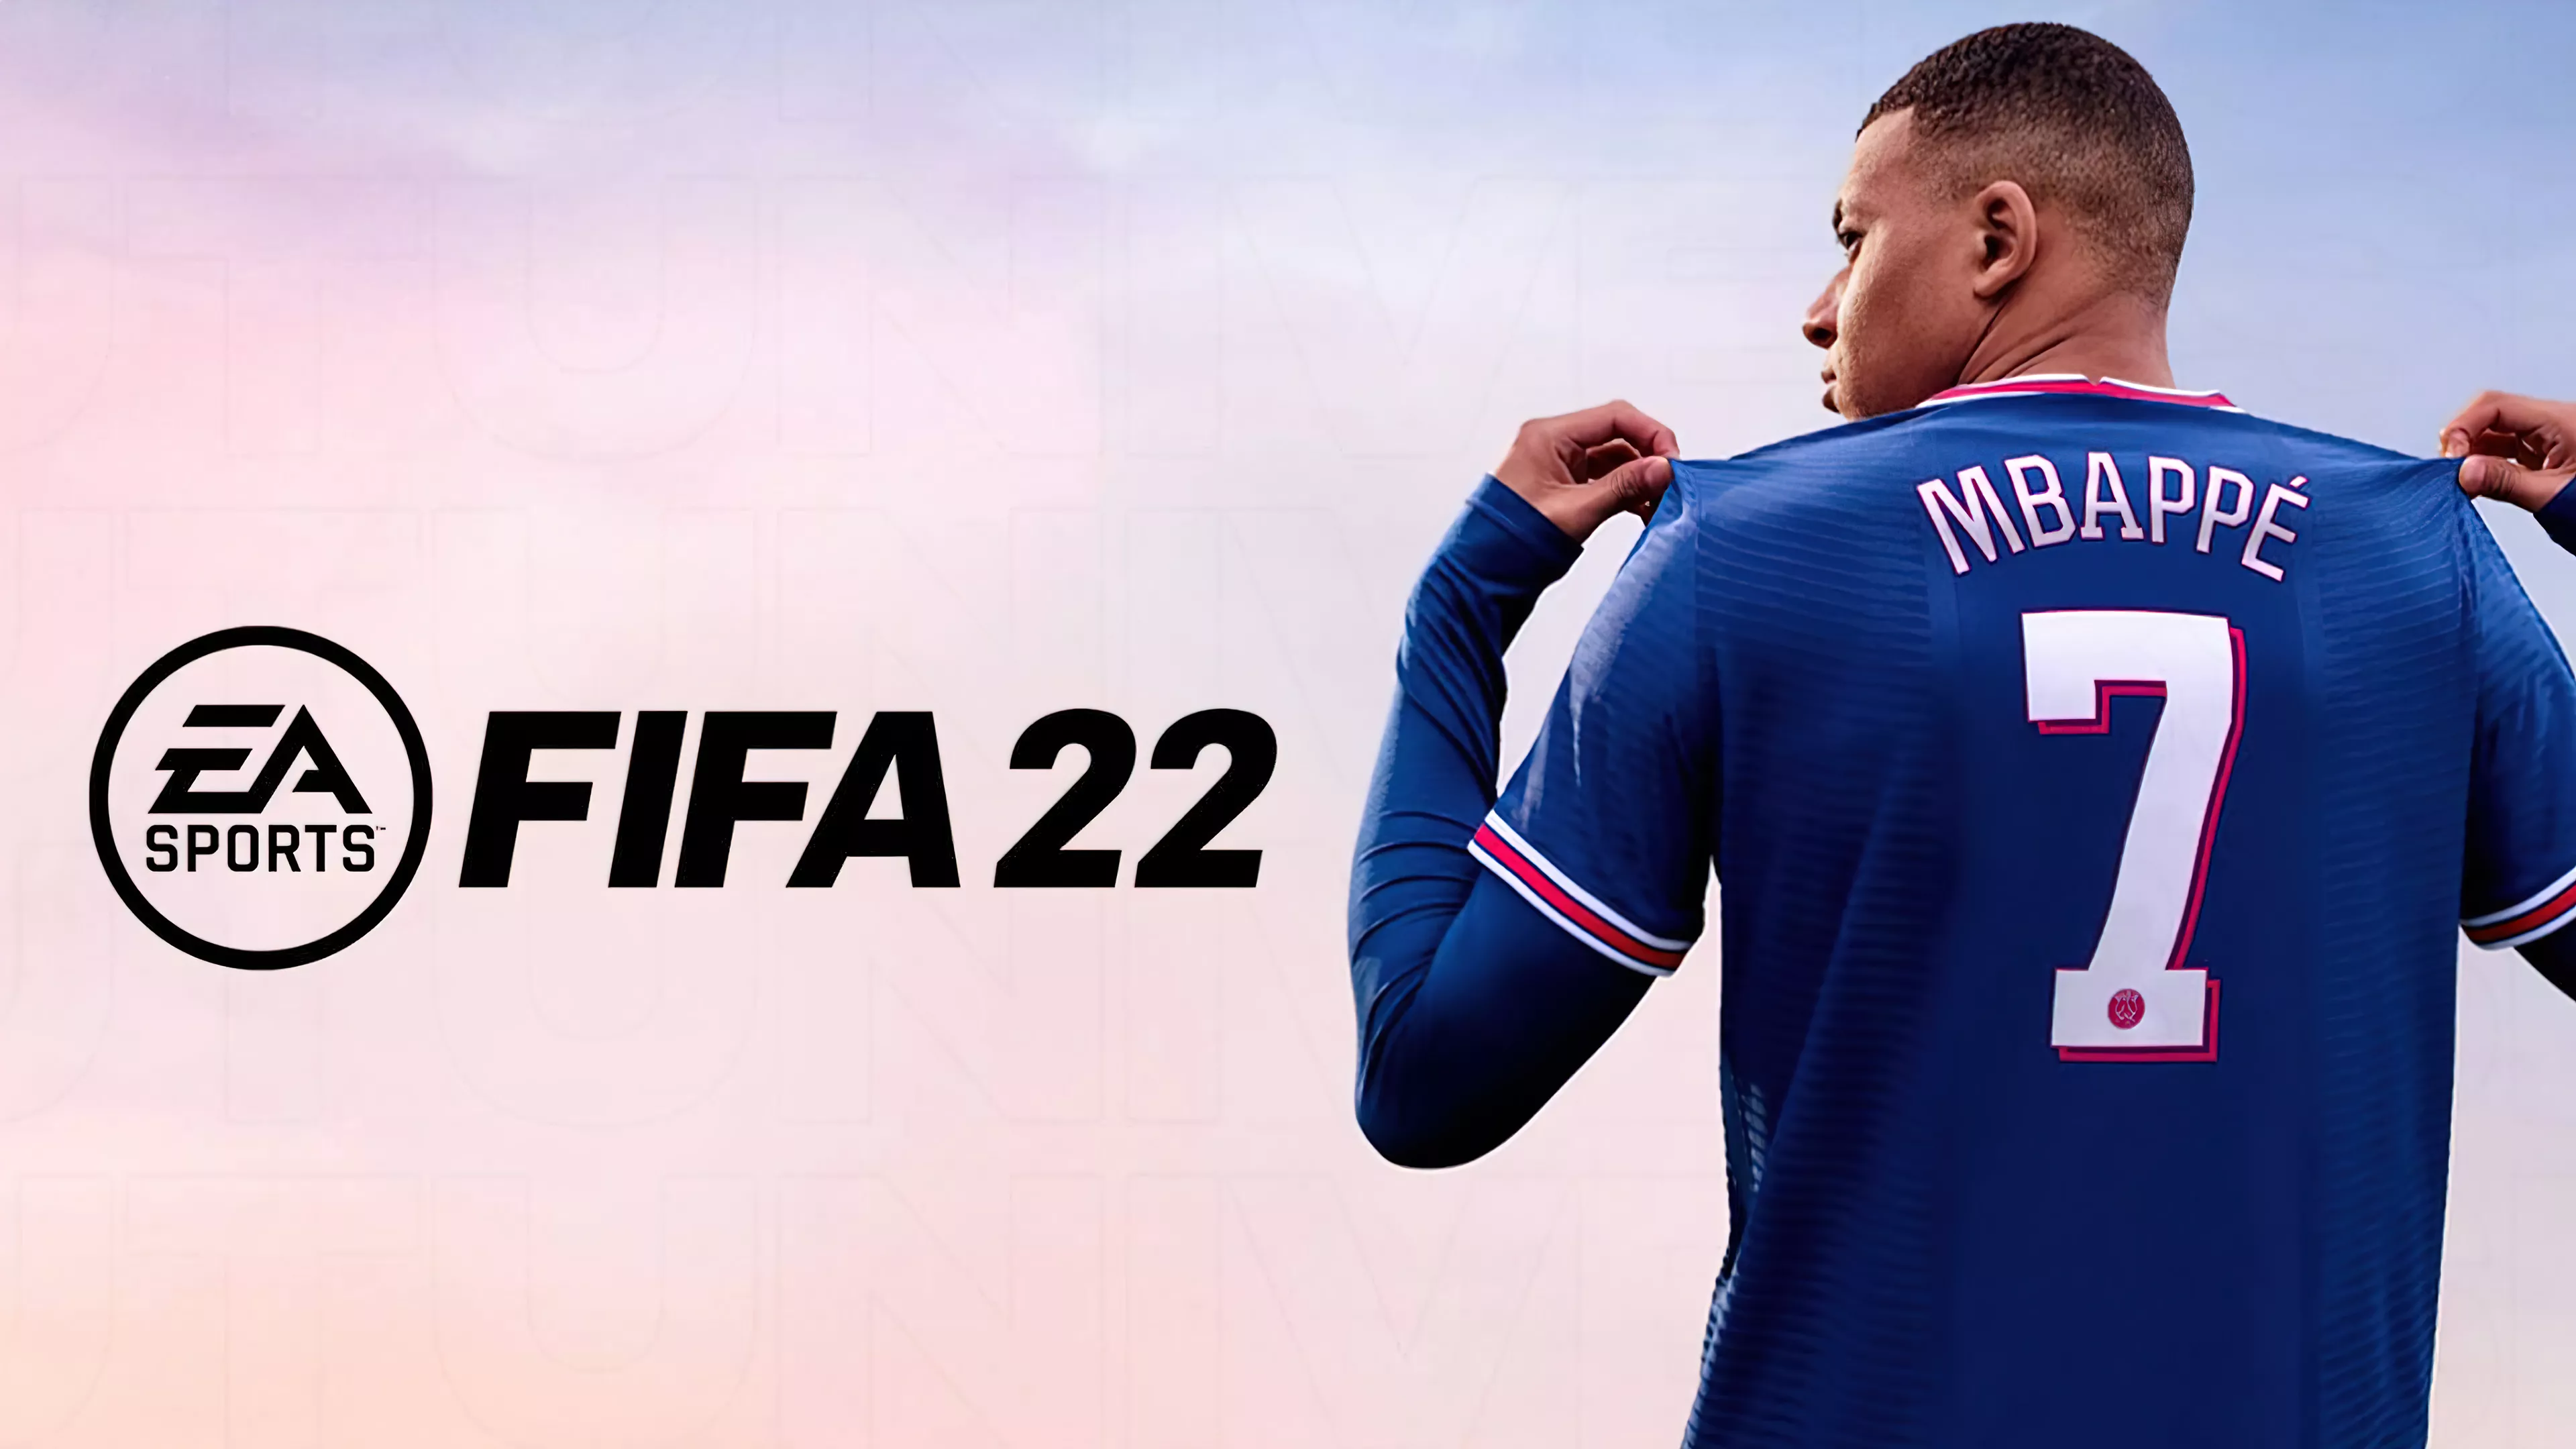 FIFA 22 with online PC Gameplay at XGAMERtechnologies